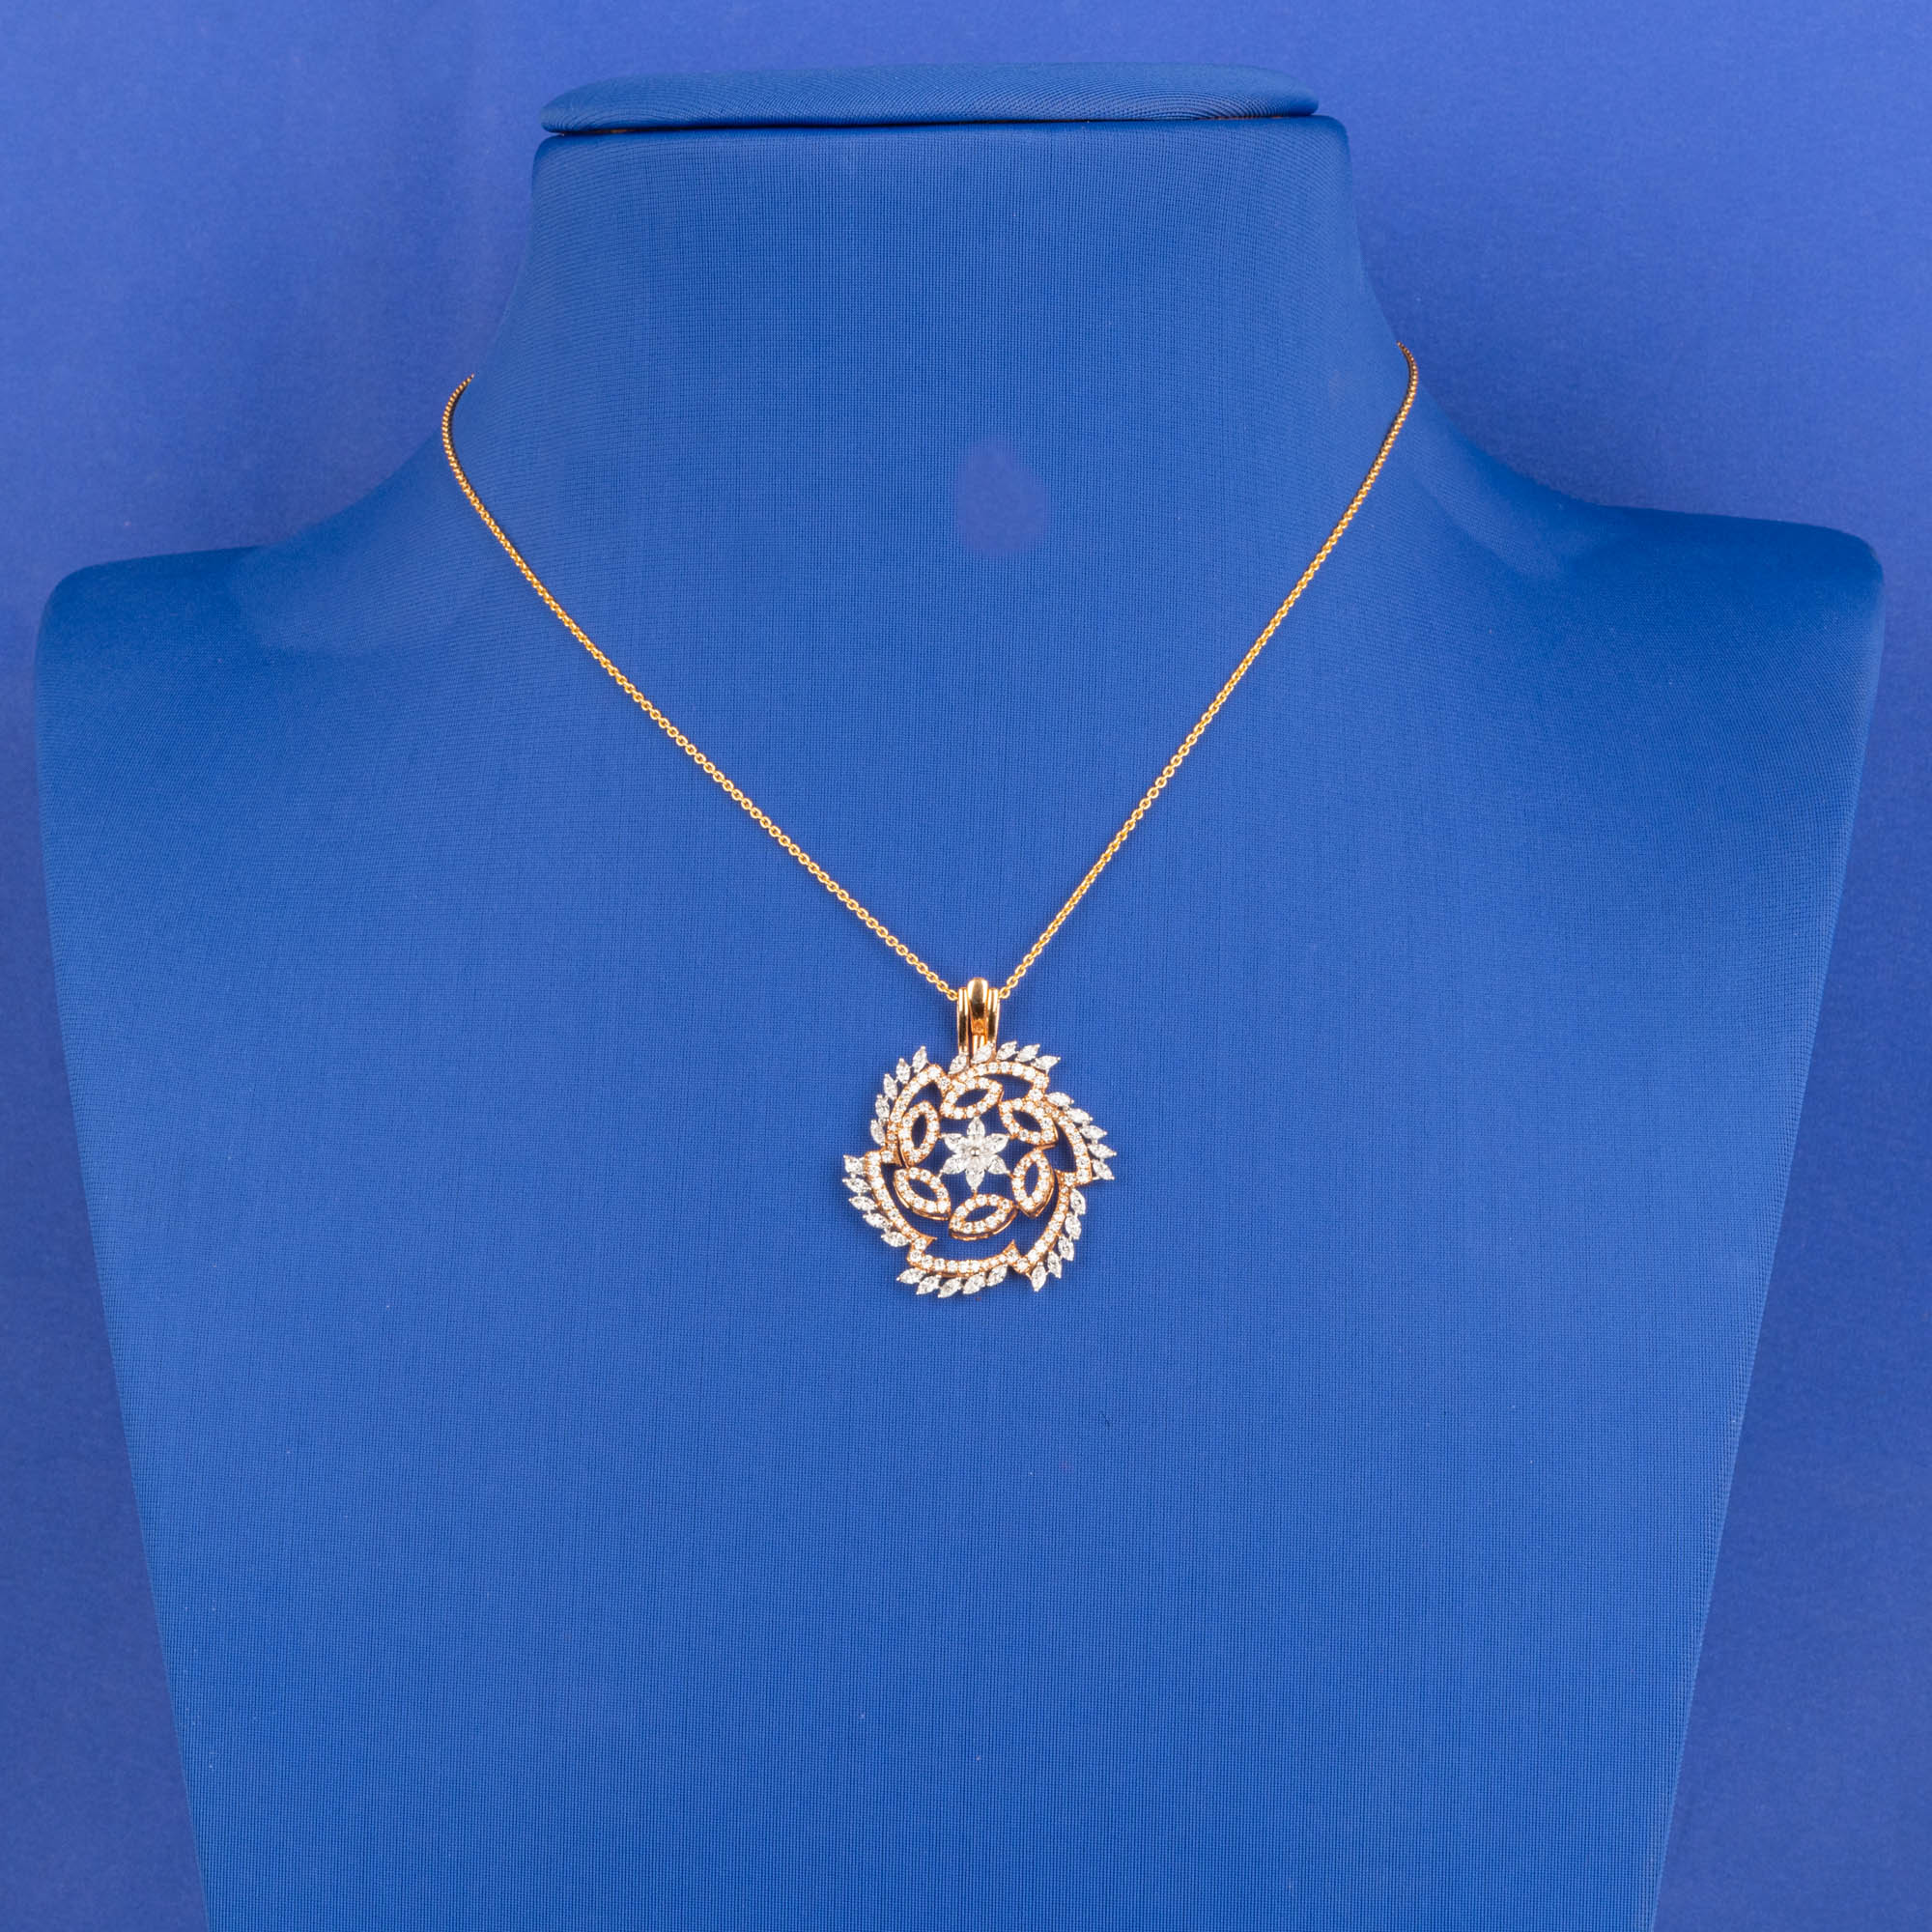 Handmade 18K Rose and White Gold Diamond Pendant (chain not included)